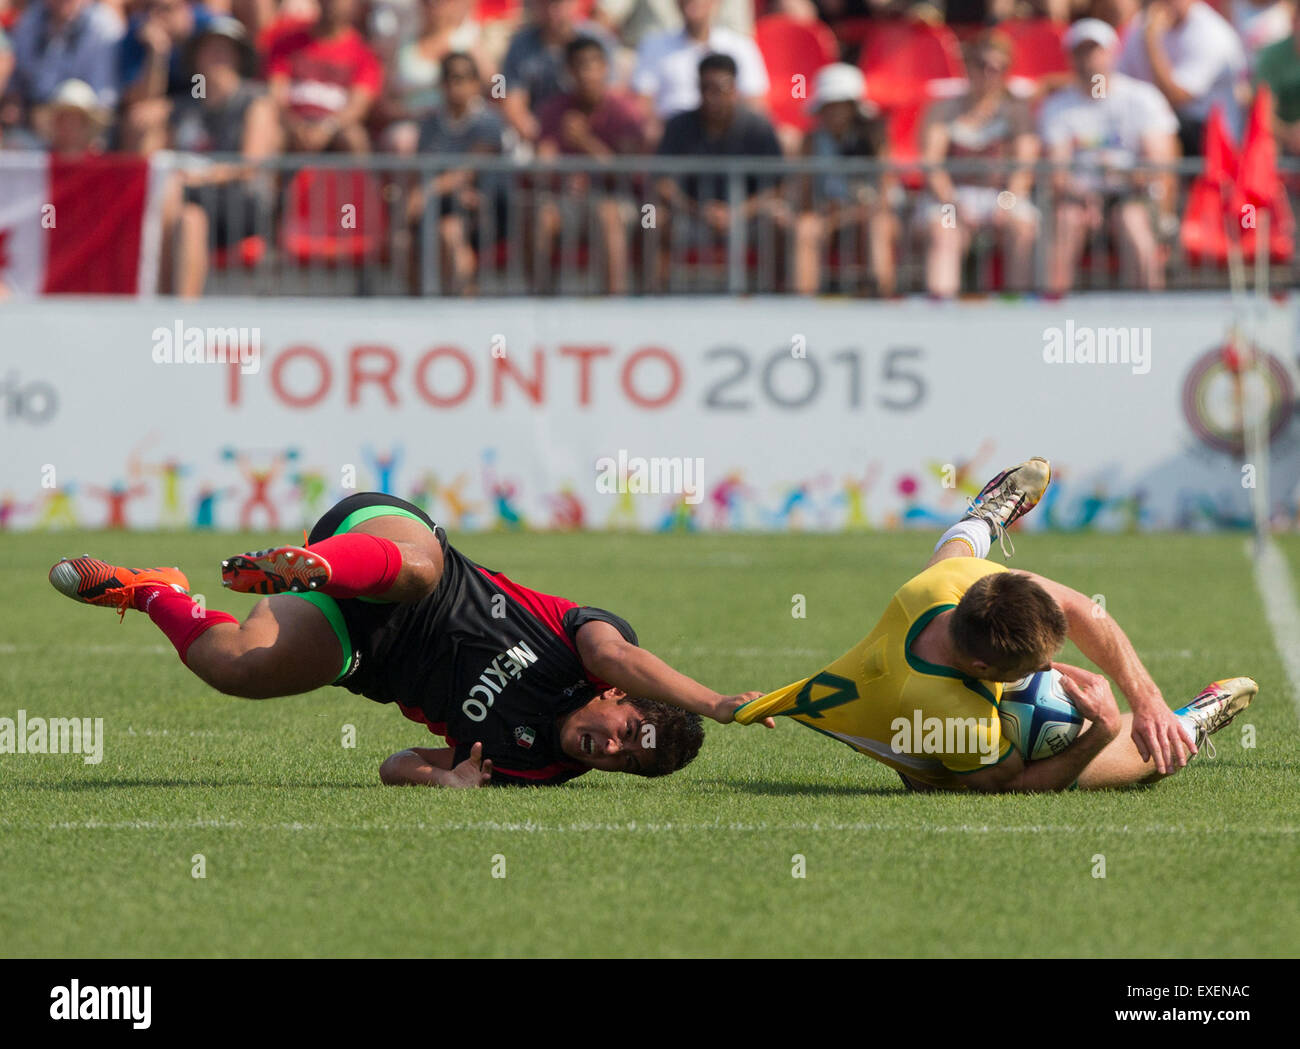 Toronto, Canada. 12th July, 2015. Muller Lucas Amadeu (R) of Brazil vies with Luis Arredondo Vargas of Mexico during the men's placing 5-8 matches of the rugby seven event at the 17th Pan American Games in Toronto, Canada, July 12, 2015. © Zou Zheng/Xinhua/Alamy Live News Stock Photo